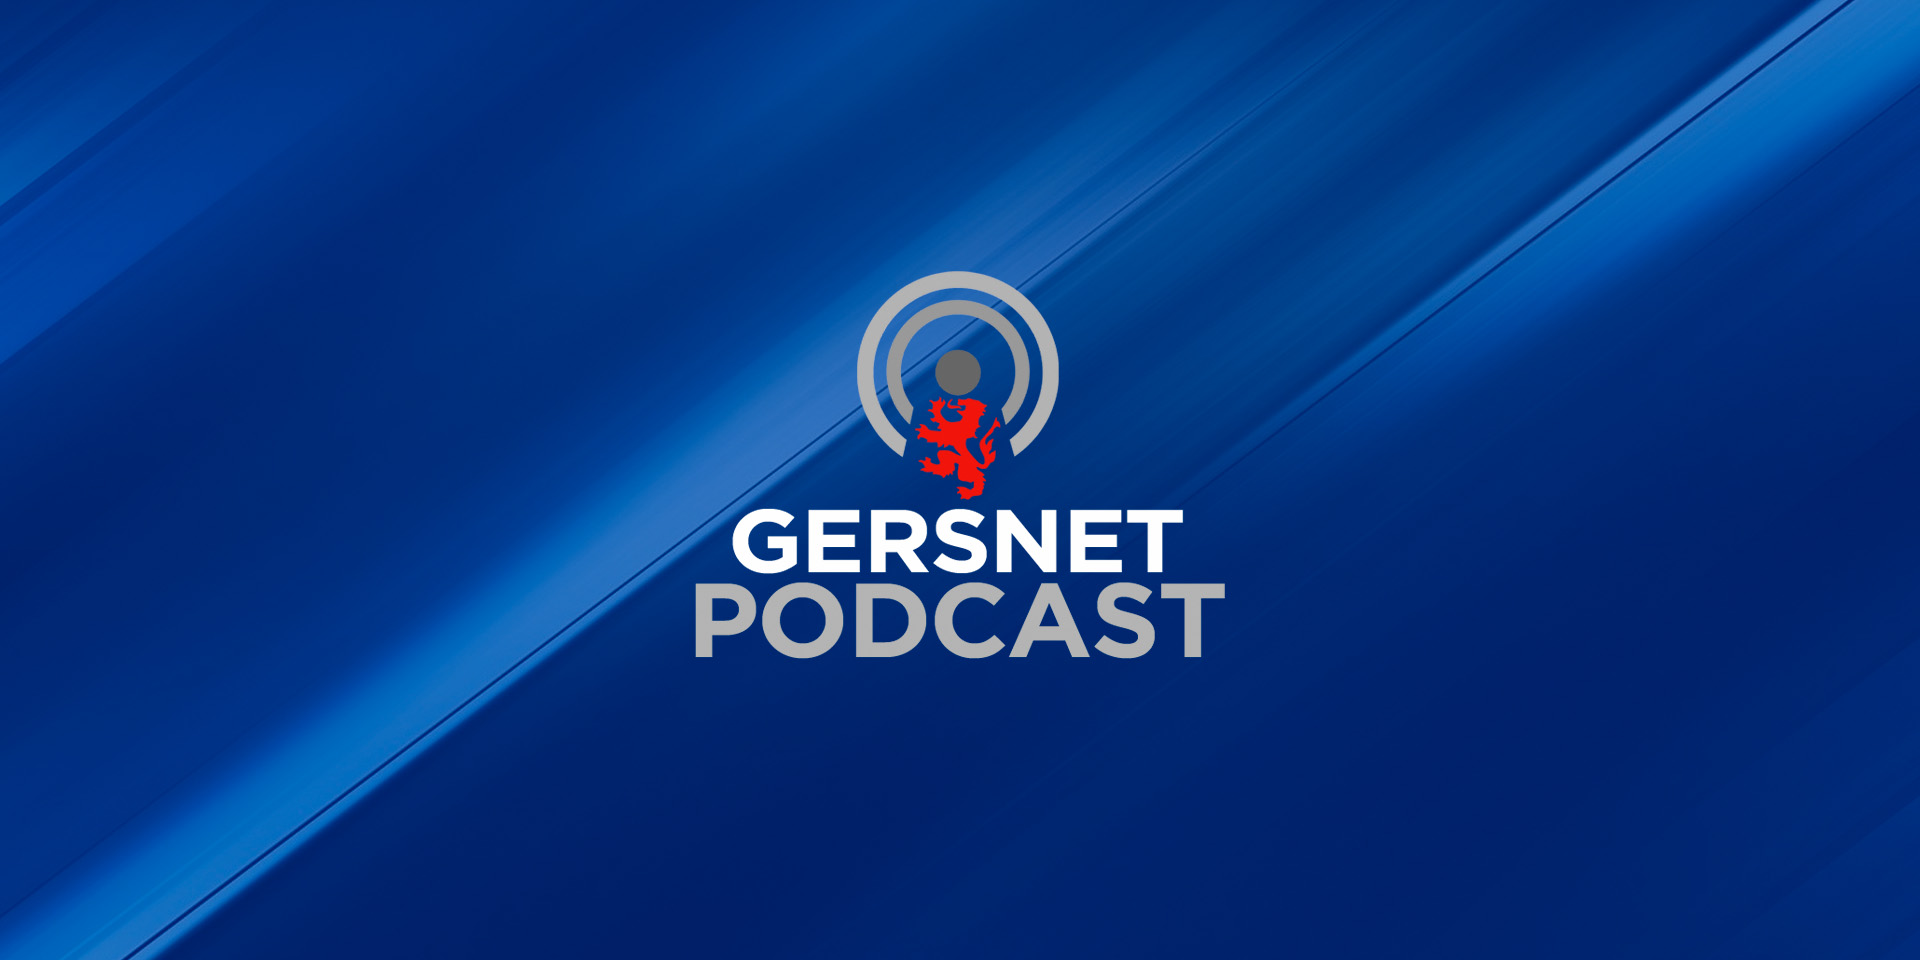 Gersnet Podcast 307 - A Midseason Review